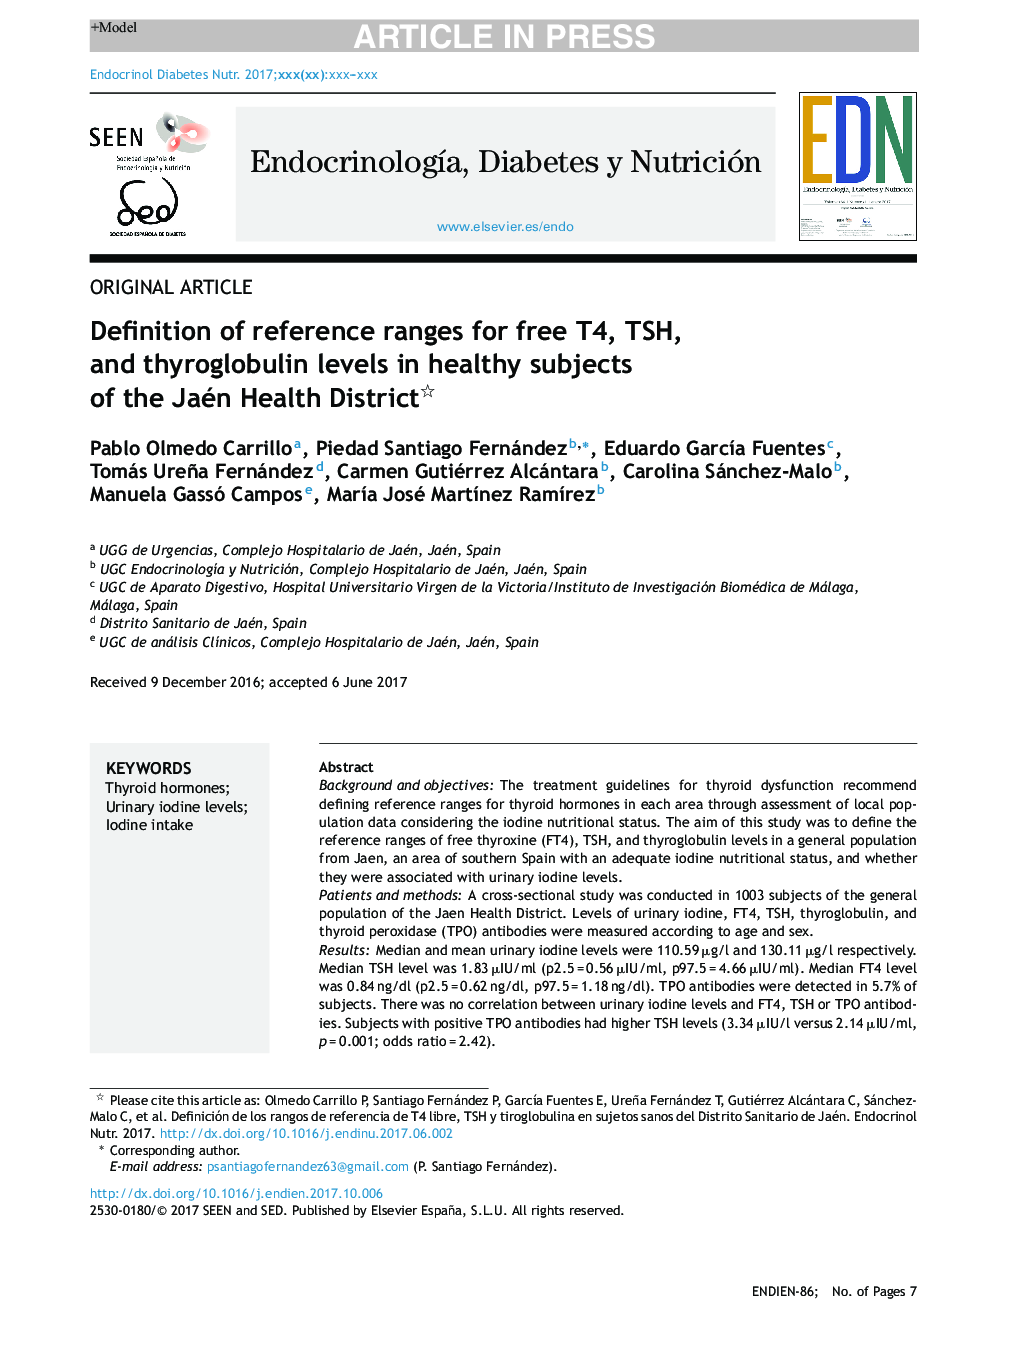 Definition of reference ranges for free T4, TSH, and thyroglobulin levels in healthy subjects of the Jaén Health District